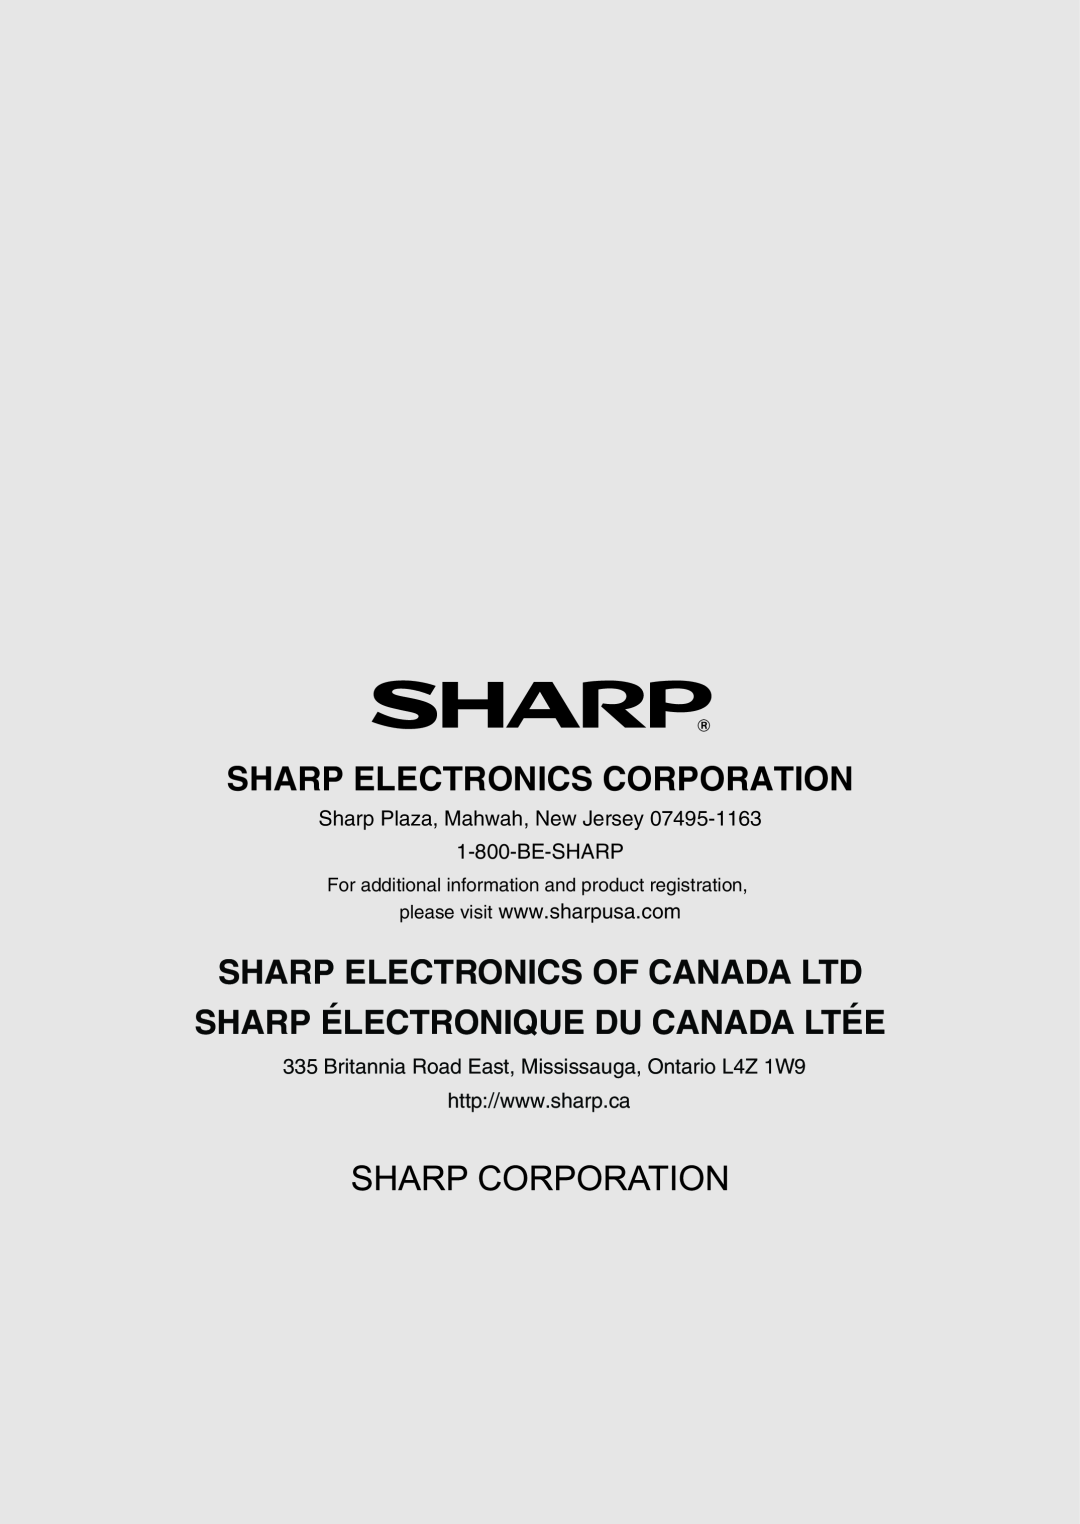 Sharp ER-A347 Sharp Plaza, Mahwah, New Jersey 1-800-BE-SHARP, For additional information and product registration 